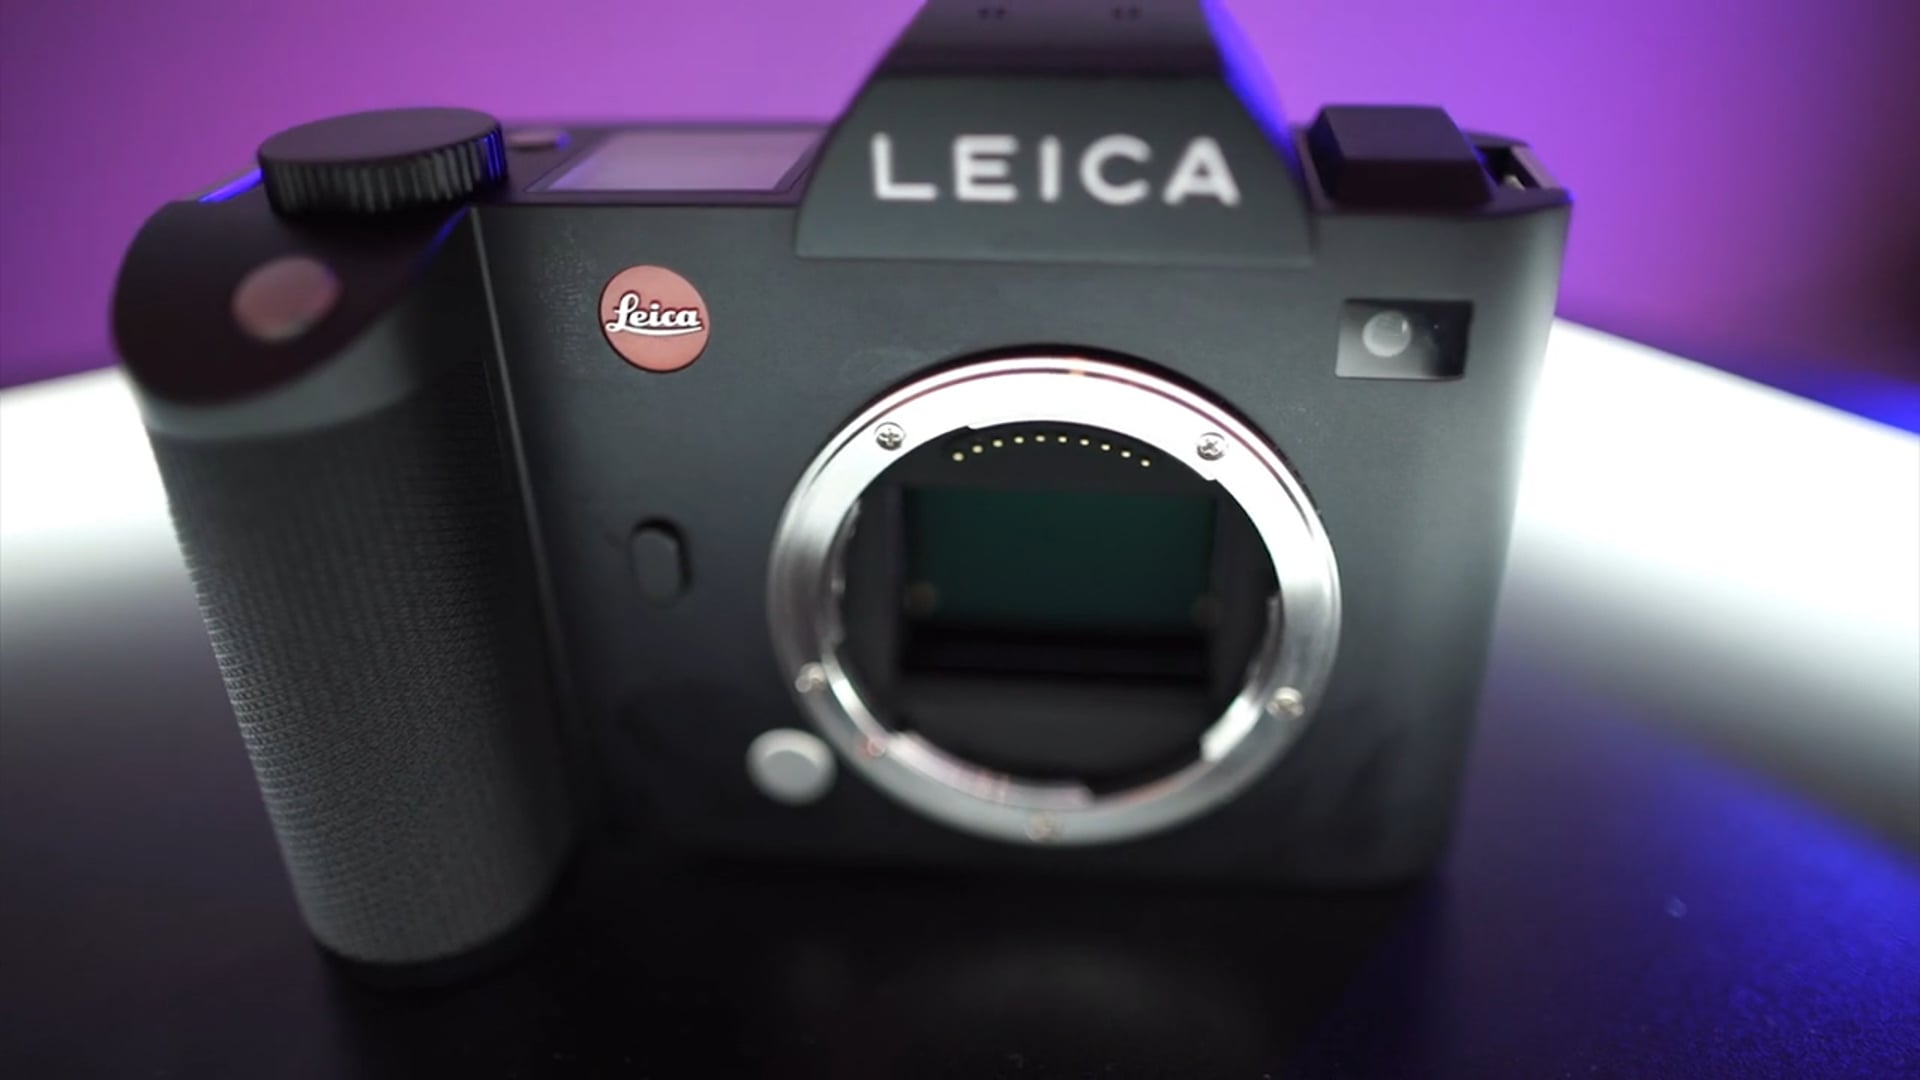 Singapore: Official Launch of the New Leica SL